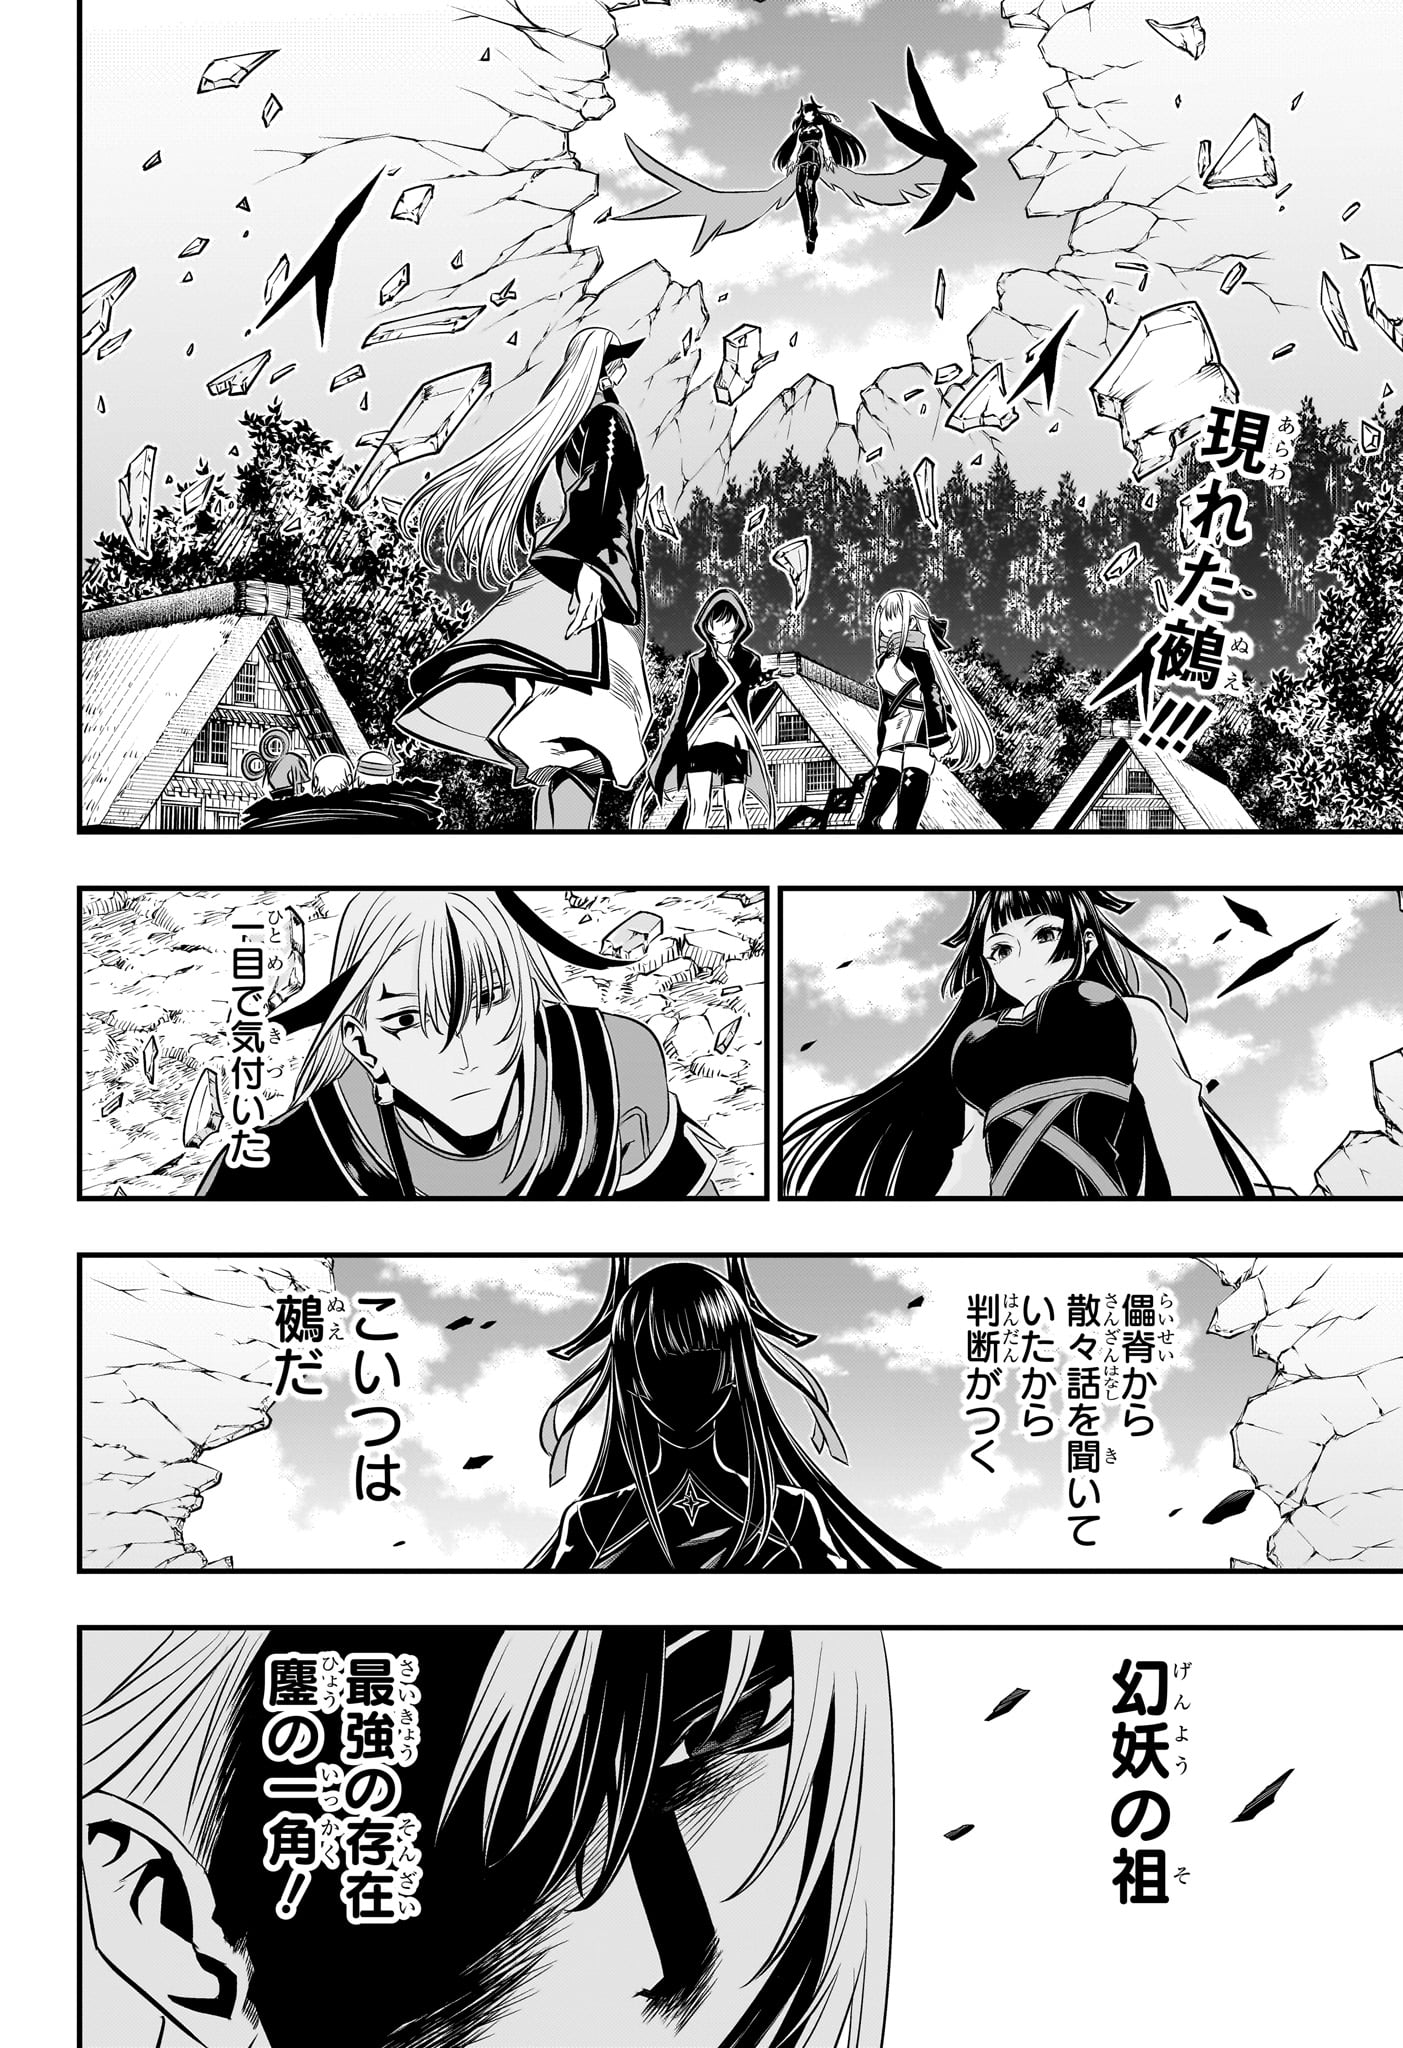 Nue no Onmyouji - Chapter 42 - Page 2